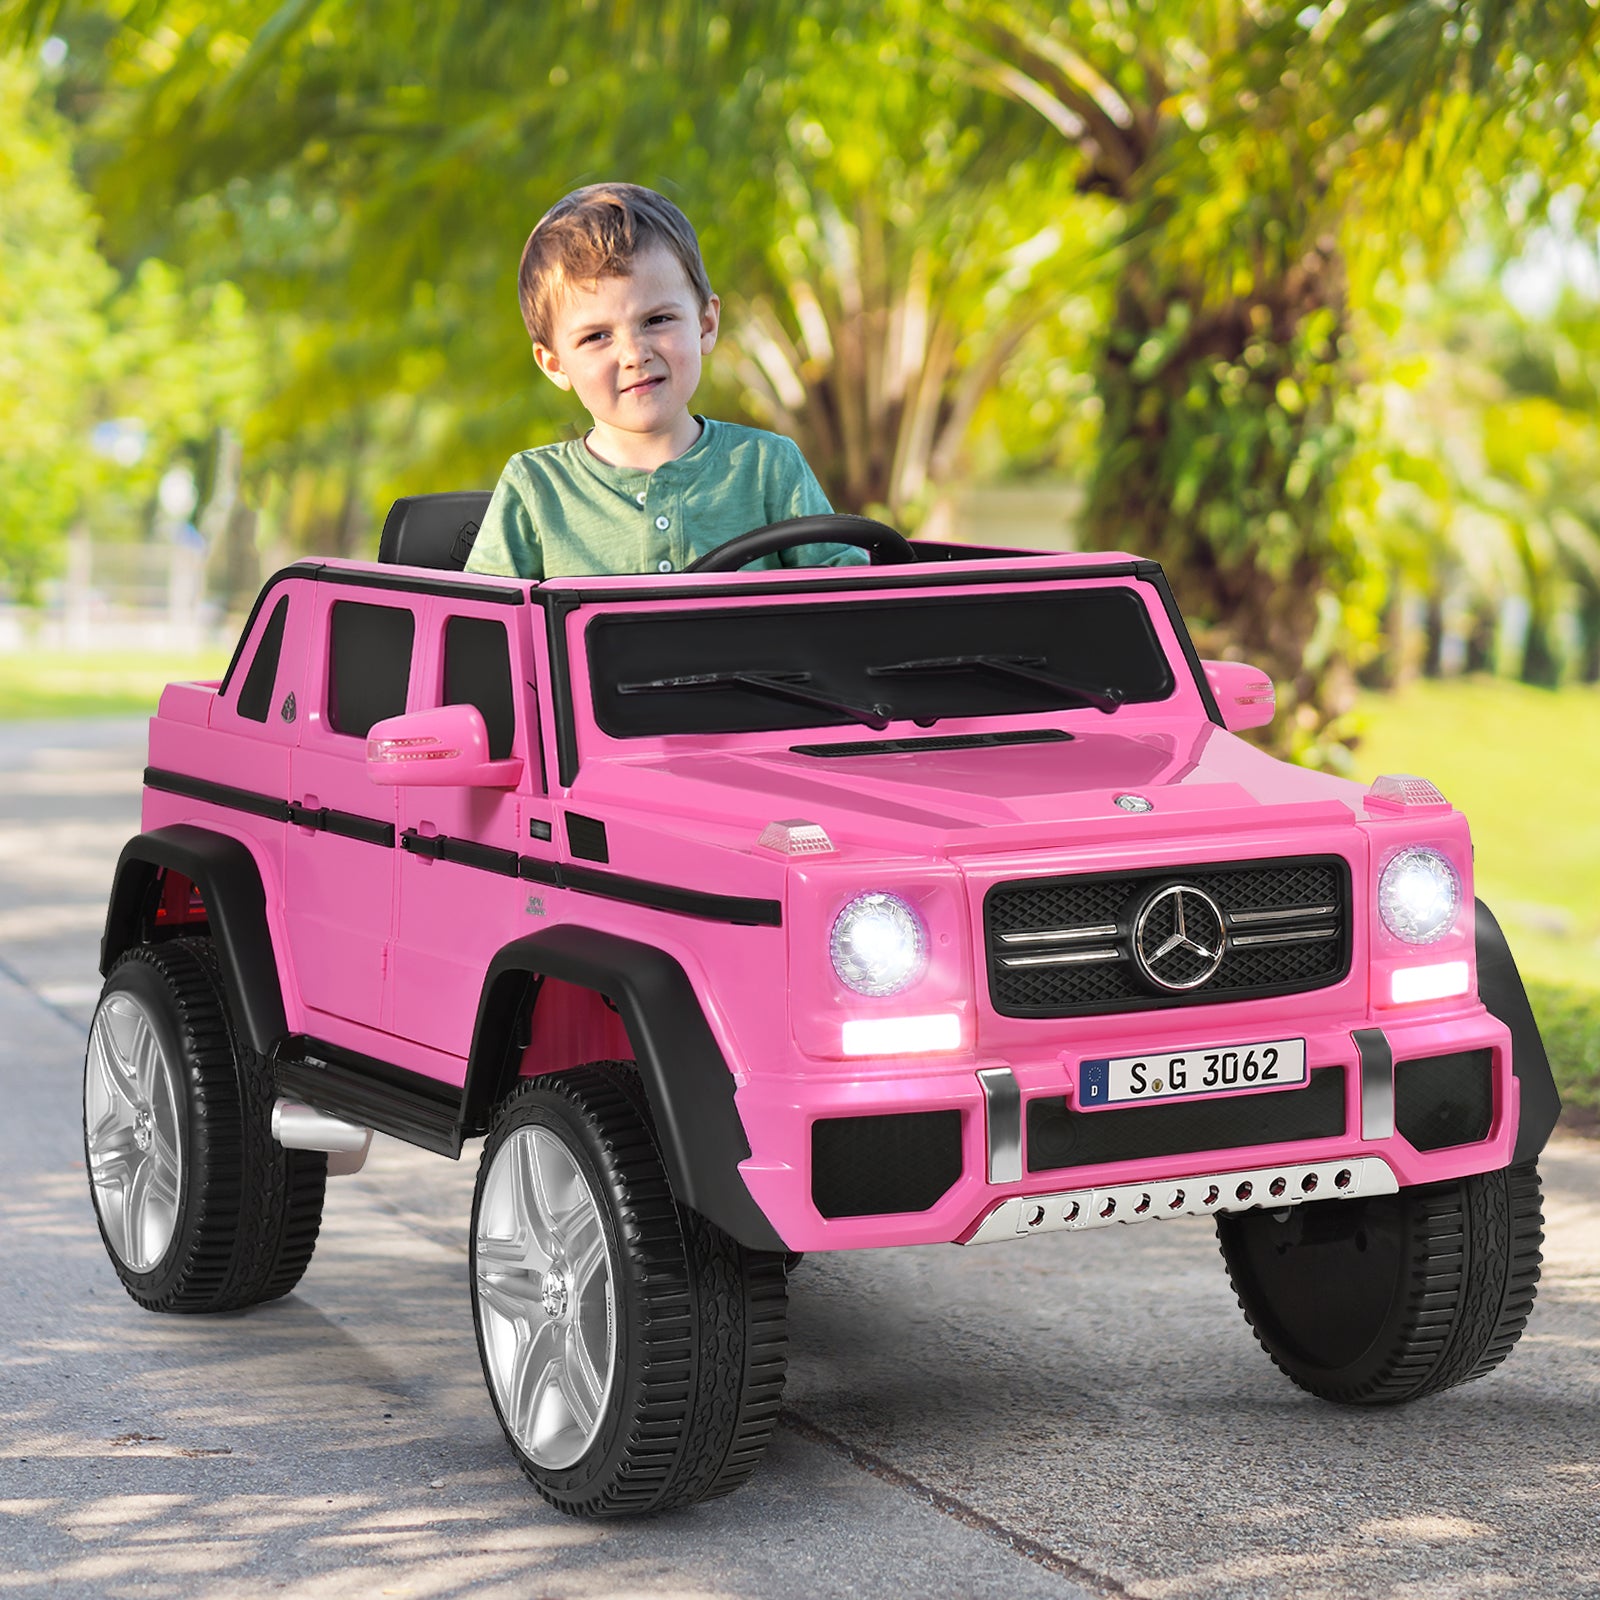 12V Electric Kids Ride On Car with 2 Motors and Remote Control Pink